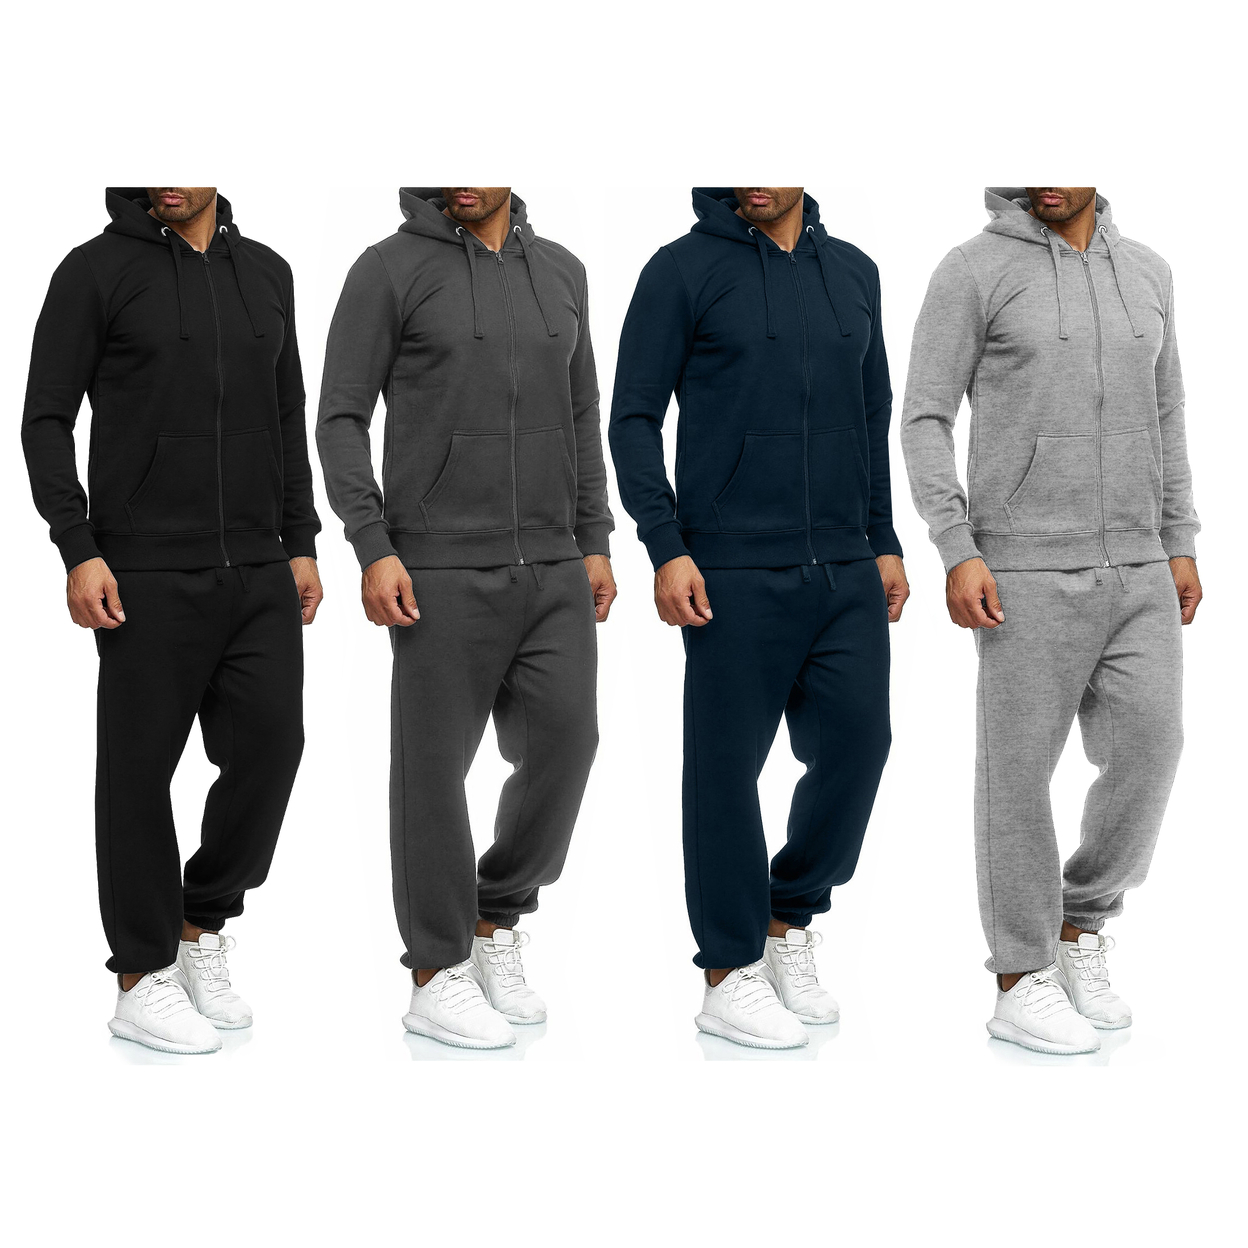 Multi-Pack: Men's Casual Big & Tall Athletic Active Winter Warm Fleece Lined Full Zip Tracksuit Jogger Set - Charcoal, 2-pack, Medium